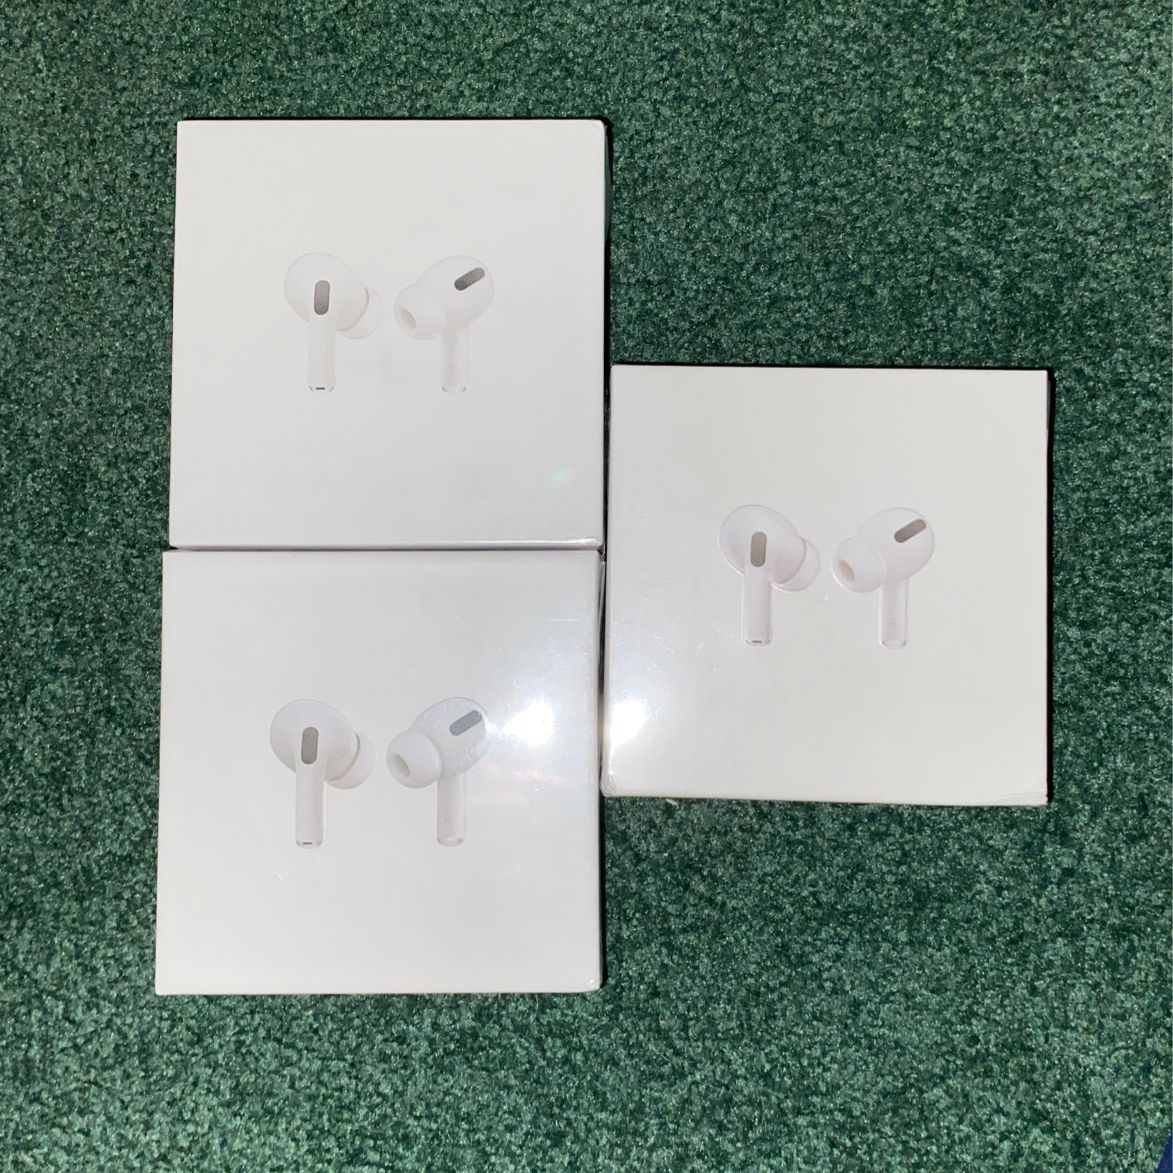 Apple Airpods Pro - Bundle of 3